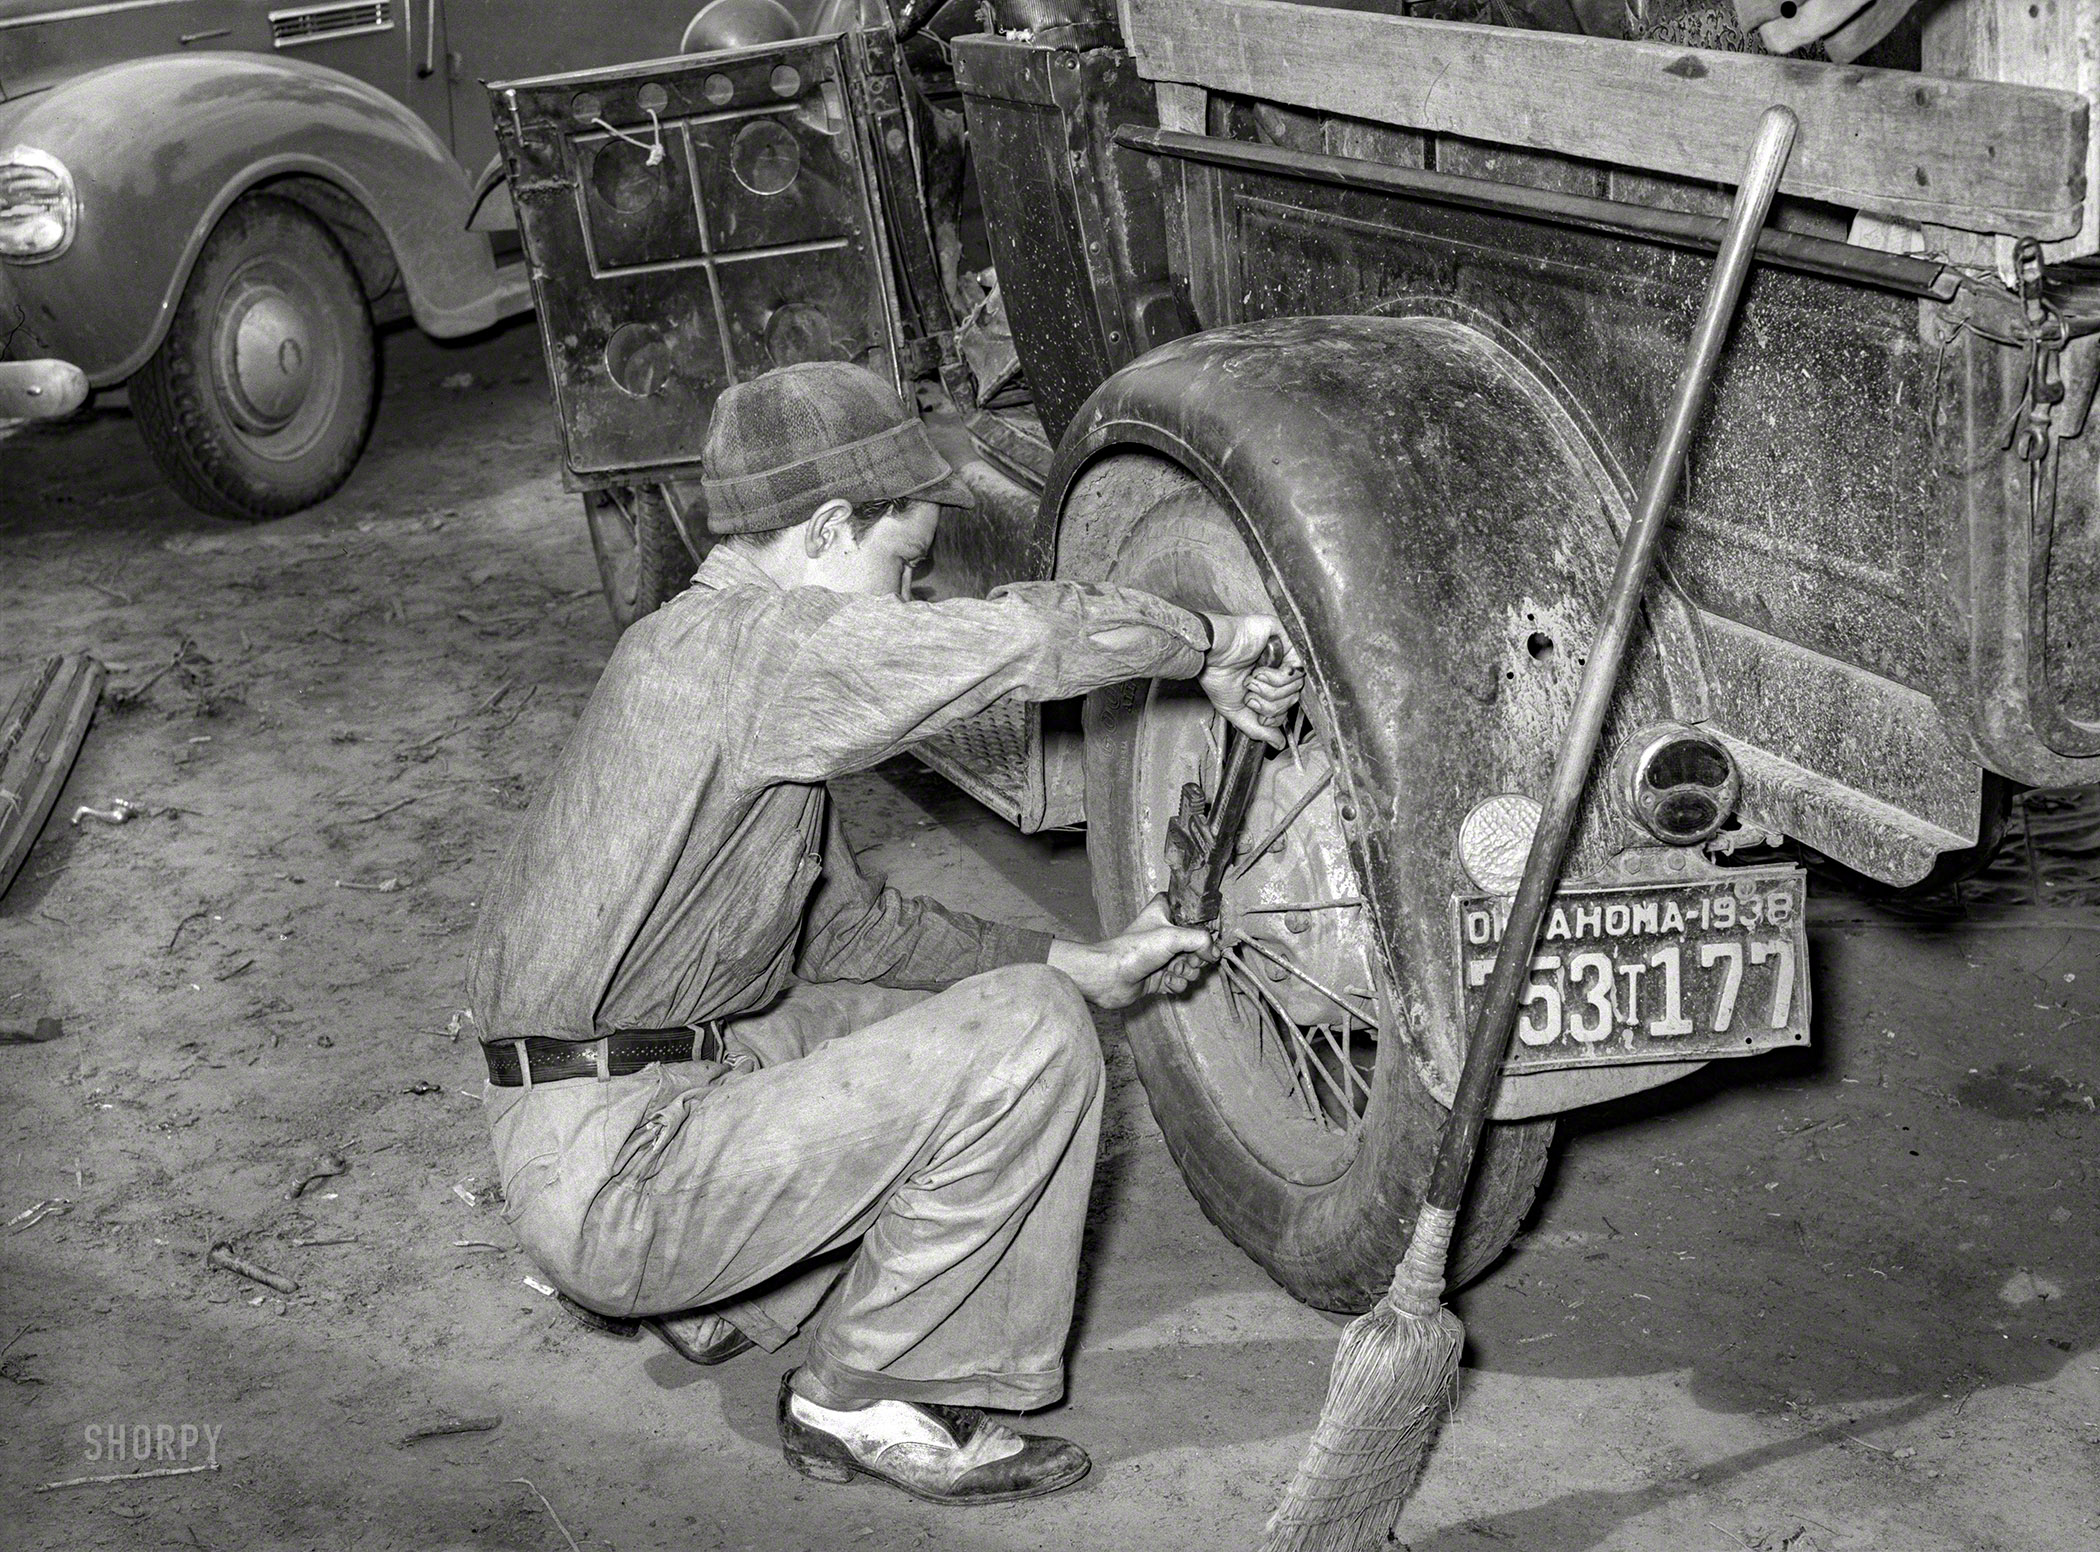 July 1939. "Migrant boy who is somewhat of a mechanic tightening the rear wheel on truck which will carry his family [that of of tenant farmer Elmer Thomas] to California from Muskogee, Oklahoma." Photo by Russell Lee. View full size.